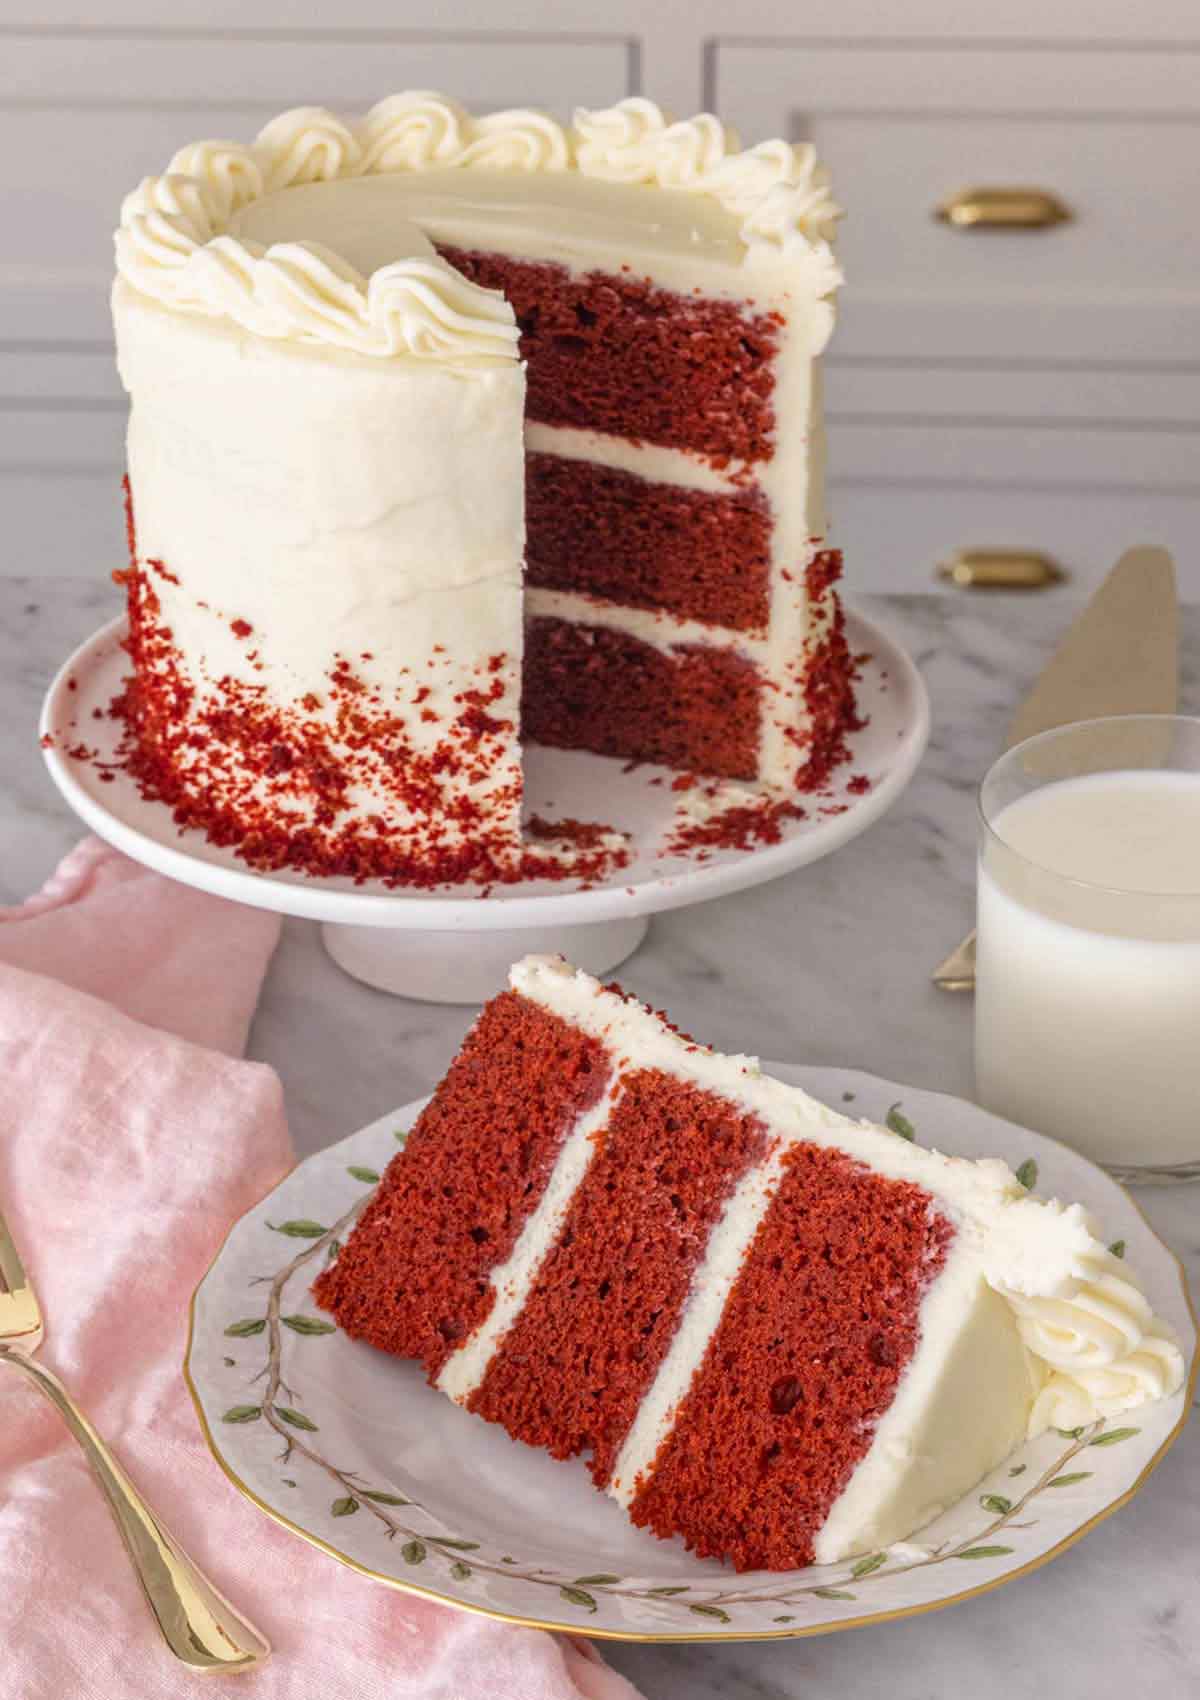 A cake stand with a slice of red velvet cake cut out and placed on a plate in front.